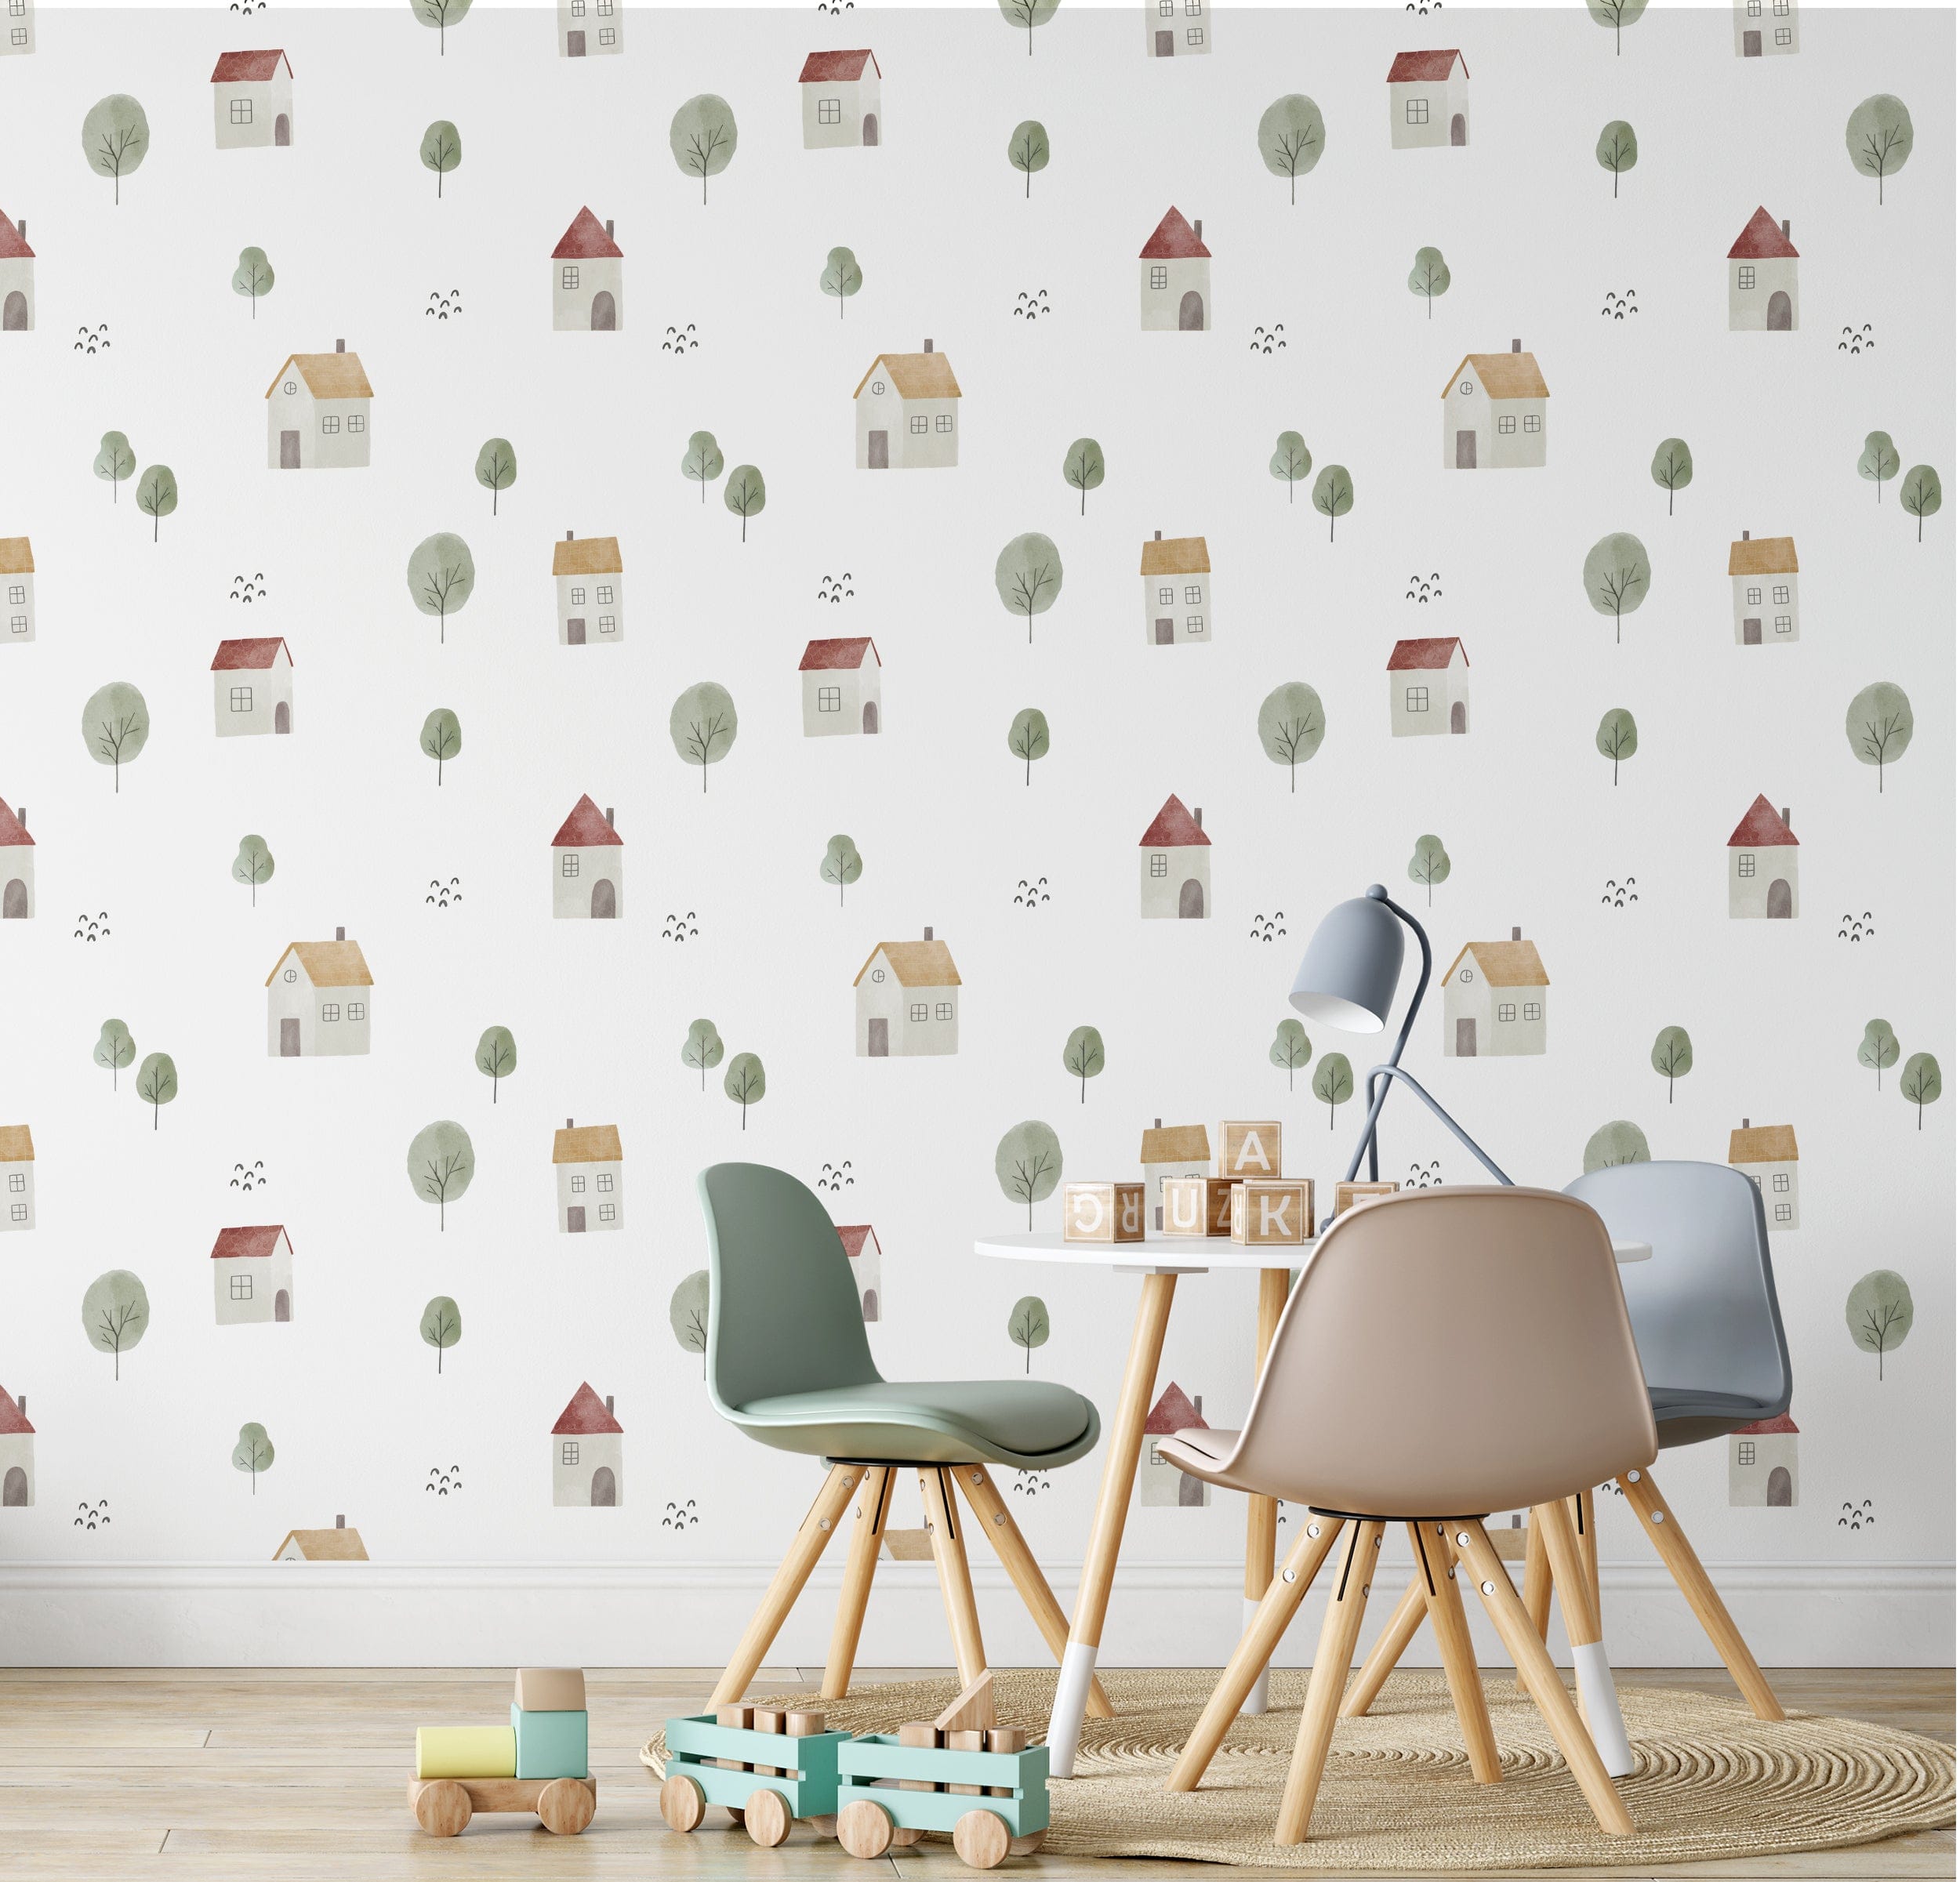 A cozy children's playroom featuring Farm Friend Wallpaper - Happy House, which displays a whimsical pattern of houses with red and yellow roofs, surrounded by green trees and tiny birds, creating a playful and inviting atmosphere.